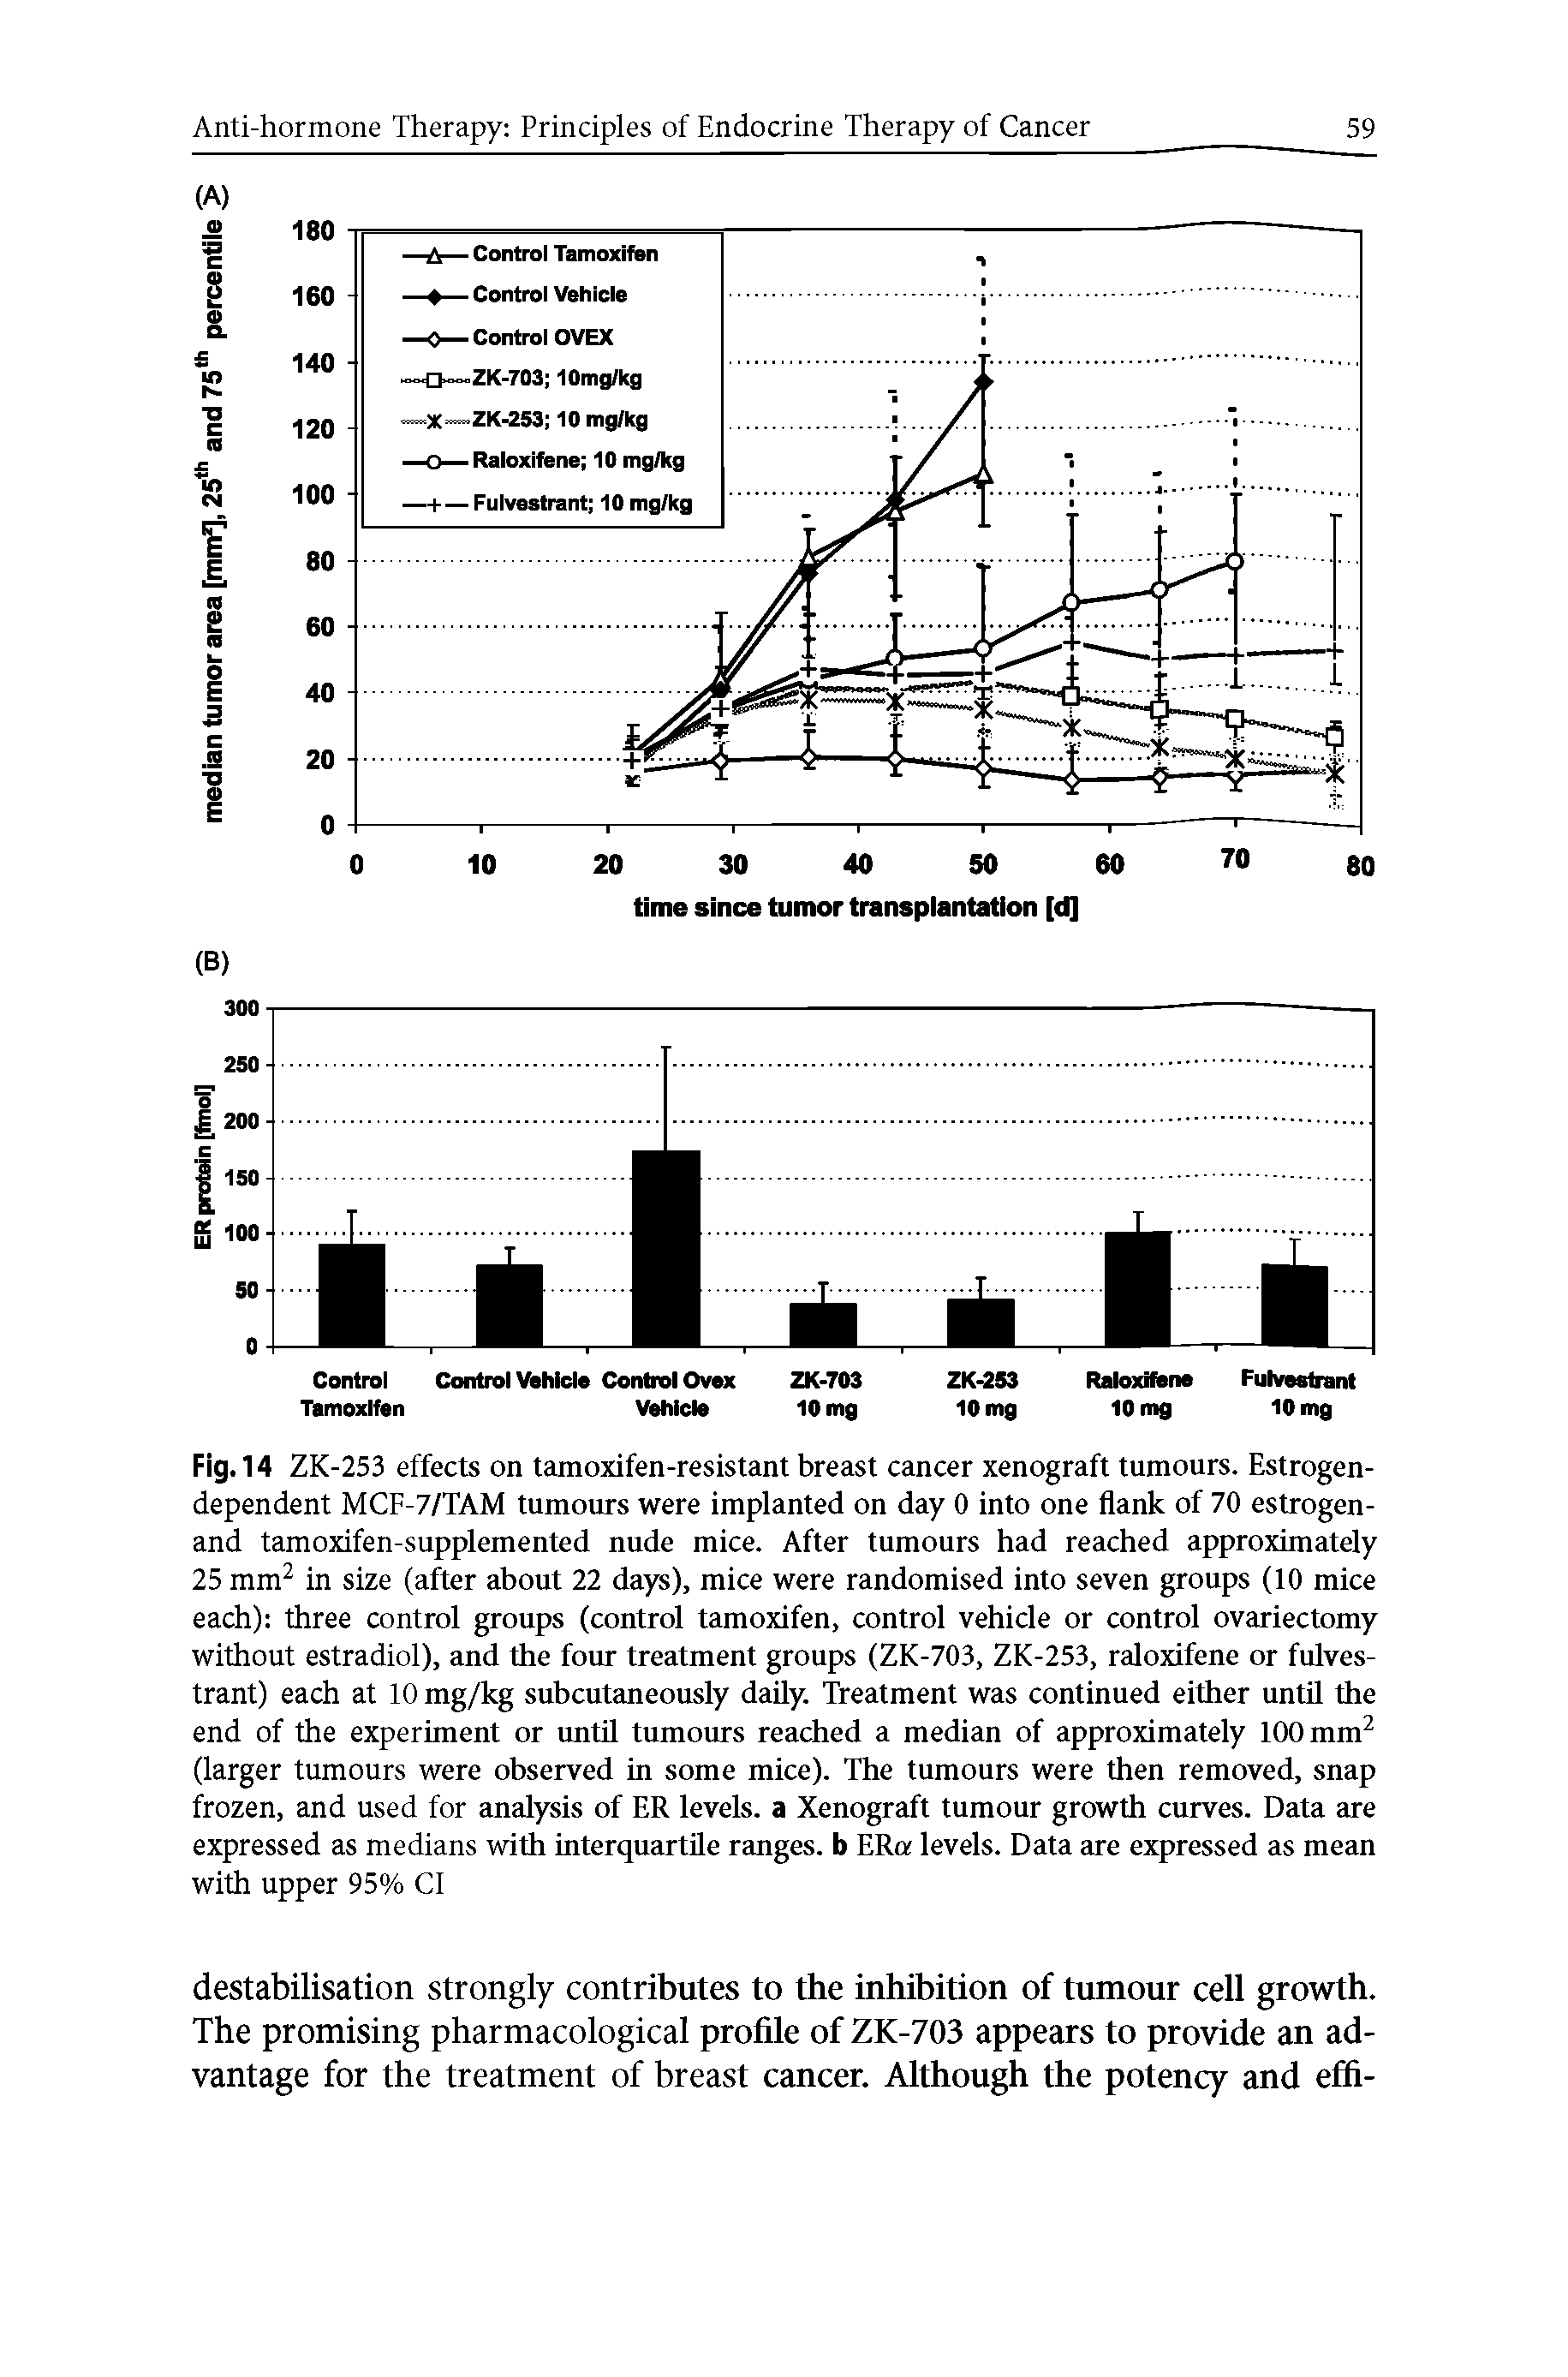 Fig. 14 ZK-253 effects on tamoxifen-resistant breast cancer xenograft tumours. Estrogen-dependent MCF-7/TAM tumours were implanted on day 0 into one flank of 70 estrogen-and tamoxifen-supplemented nude mice. After tumours had reached approximately 25 mm in size (after about 22 days), mice were randomised into seven groups (10 mice each) three control groups (control tamoxifen, control vehicle or control ovariectomy without estradiol), and the fom treatment groups (ZK-703, ZK-253, raloxifene or fulves-trant) each at 10 mg/kg subcutaneously daily. Treatment was continued either until the end of the experiment or imtil tumoms reached a median of approximately 100 mm (larger tumours were observed in some mice). The tumours were then removed, snap frozen, and used for analysis of ER levels, a Xenograft tumour growth curves. Data are expressed as medians with interquartile ranges, b ERa levels. Data are expressed as mean with upper 95% Cl...